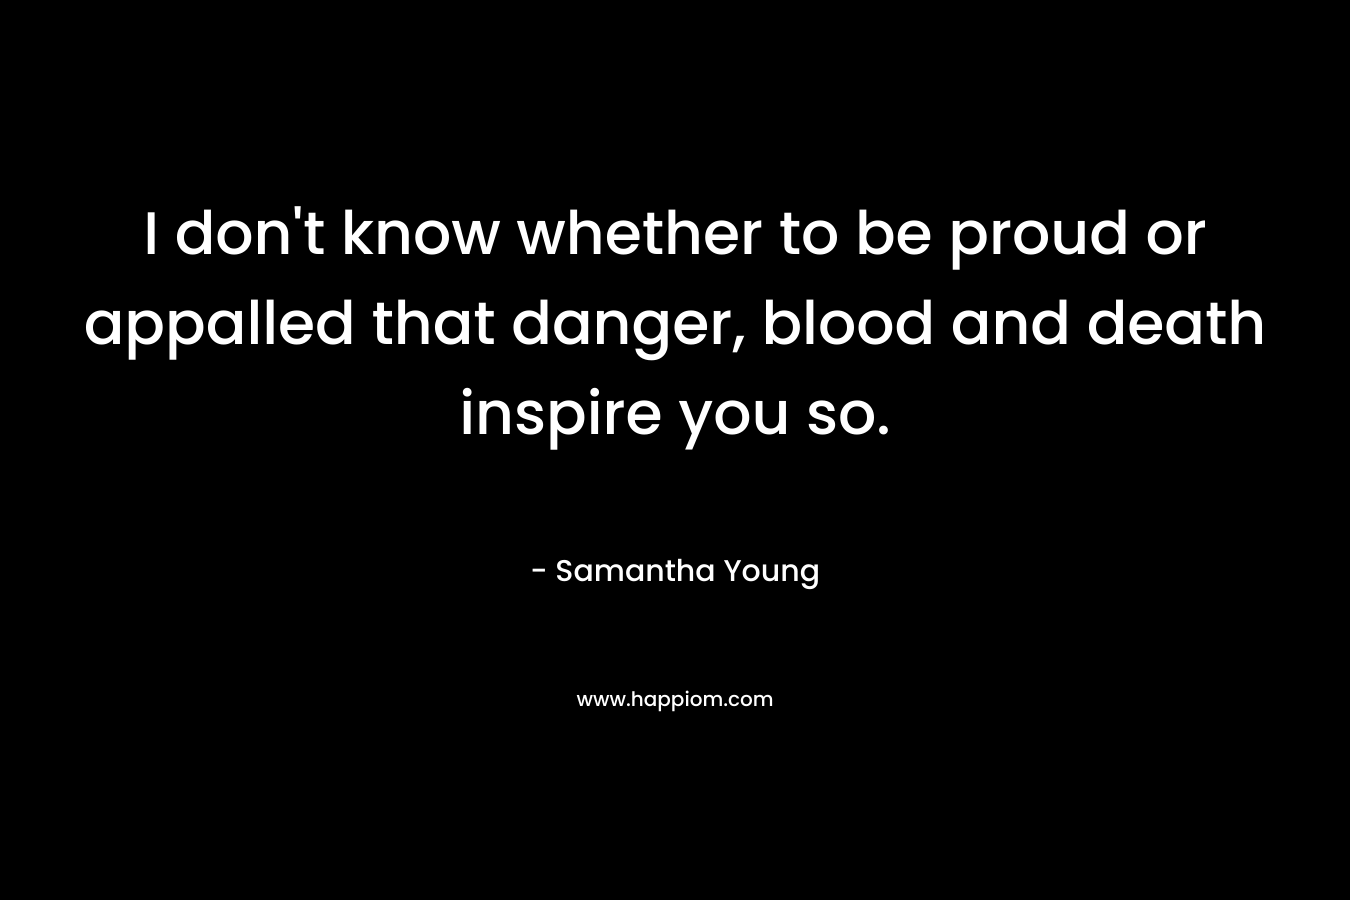 I don’t know whether to be proud or appalled that danger, blood and death inspire you so. – Samantha Young